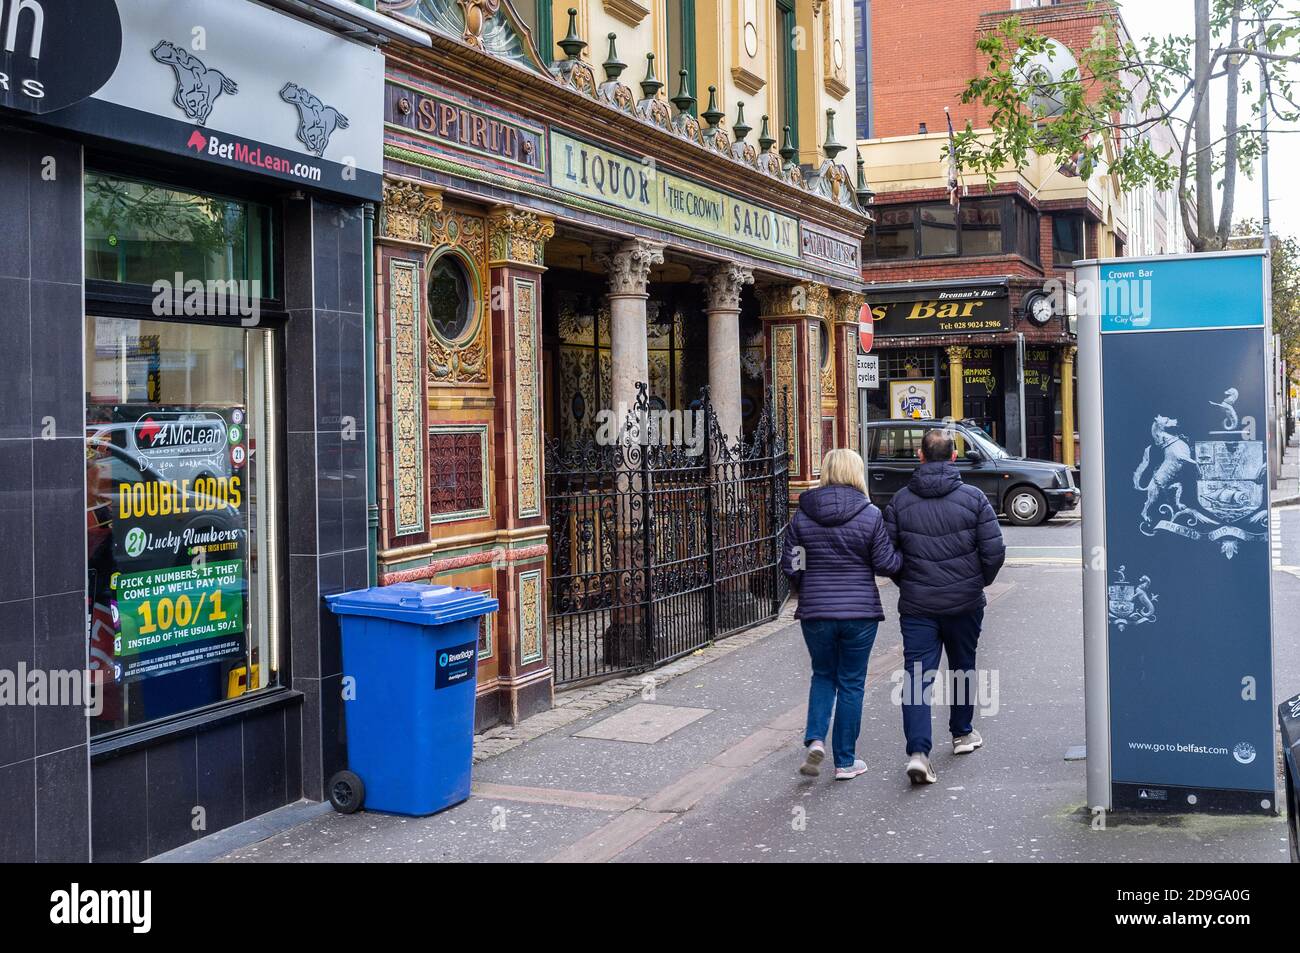 Belfast, Northern Ireland, UK, 4 November 2020: A couple walk past the closed Crown Bar. Bars in Northern Ireland have been closed from 16 October and are due to open on 15 November. Dr. Tom Black, Chair of the BMA, Northern Ireland has questioned the wisdom of relaxing the lock down on this date. Stock Photo